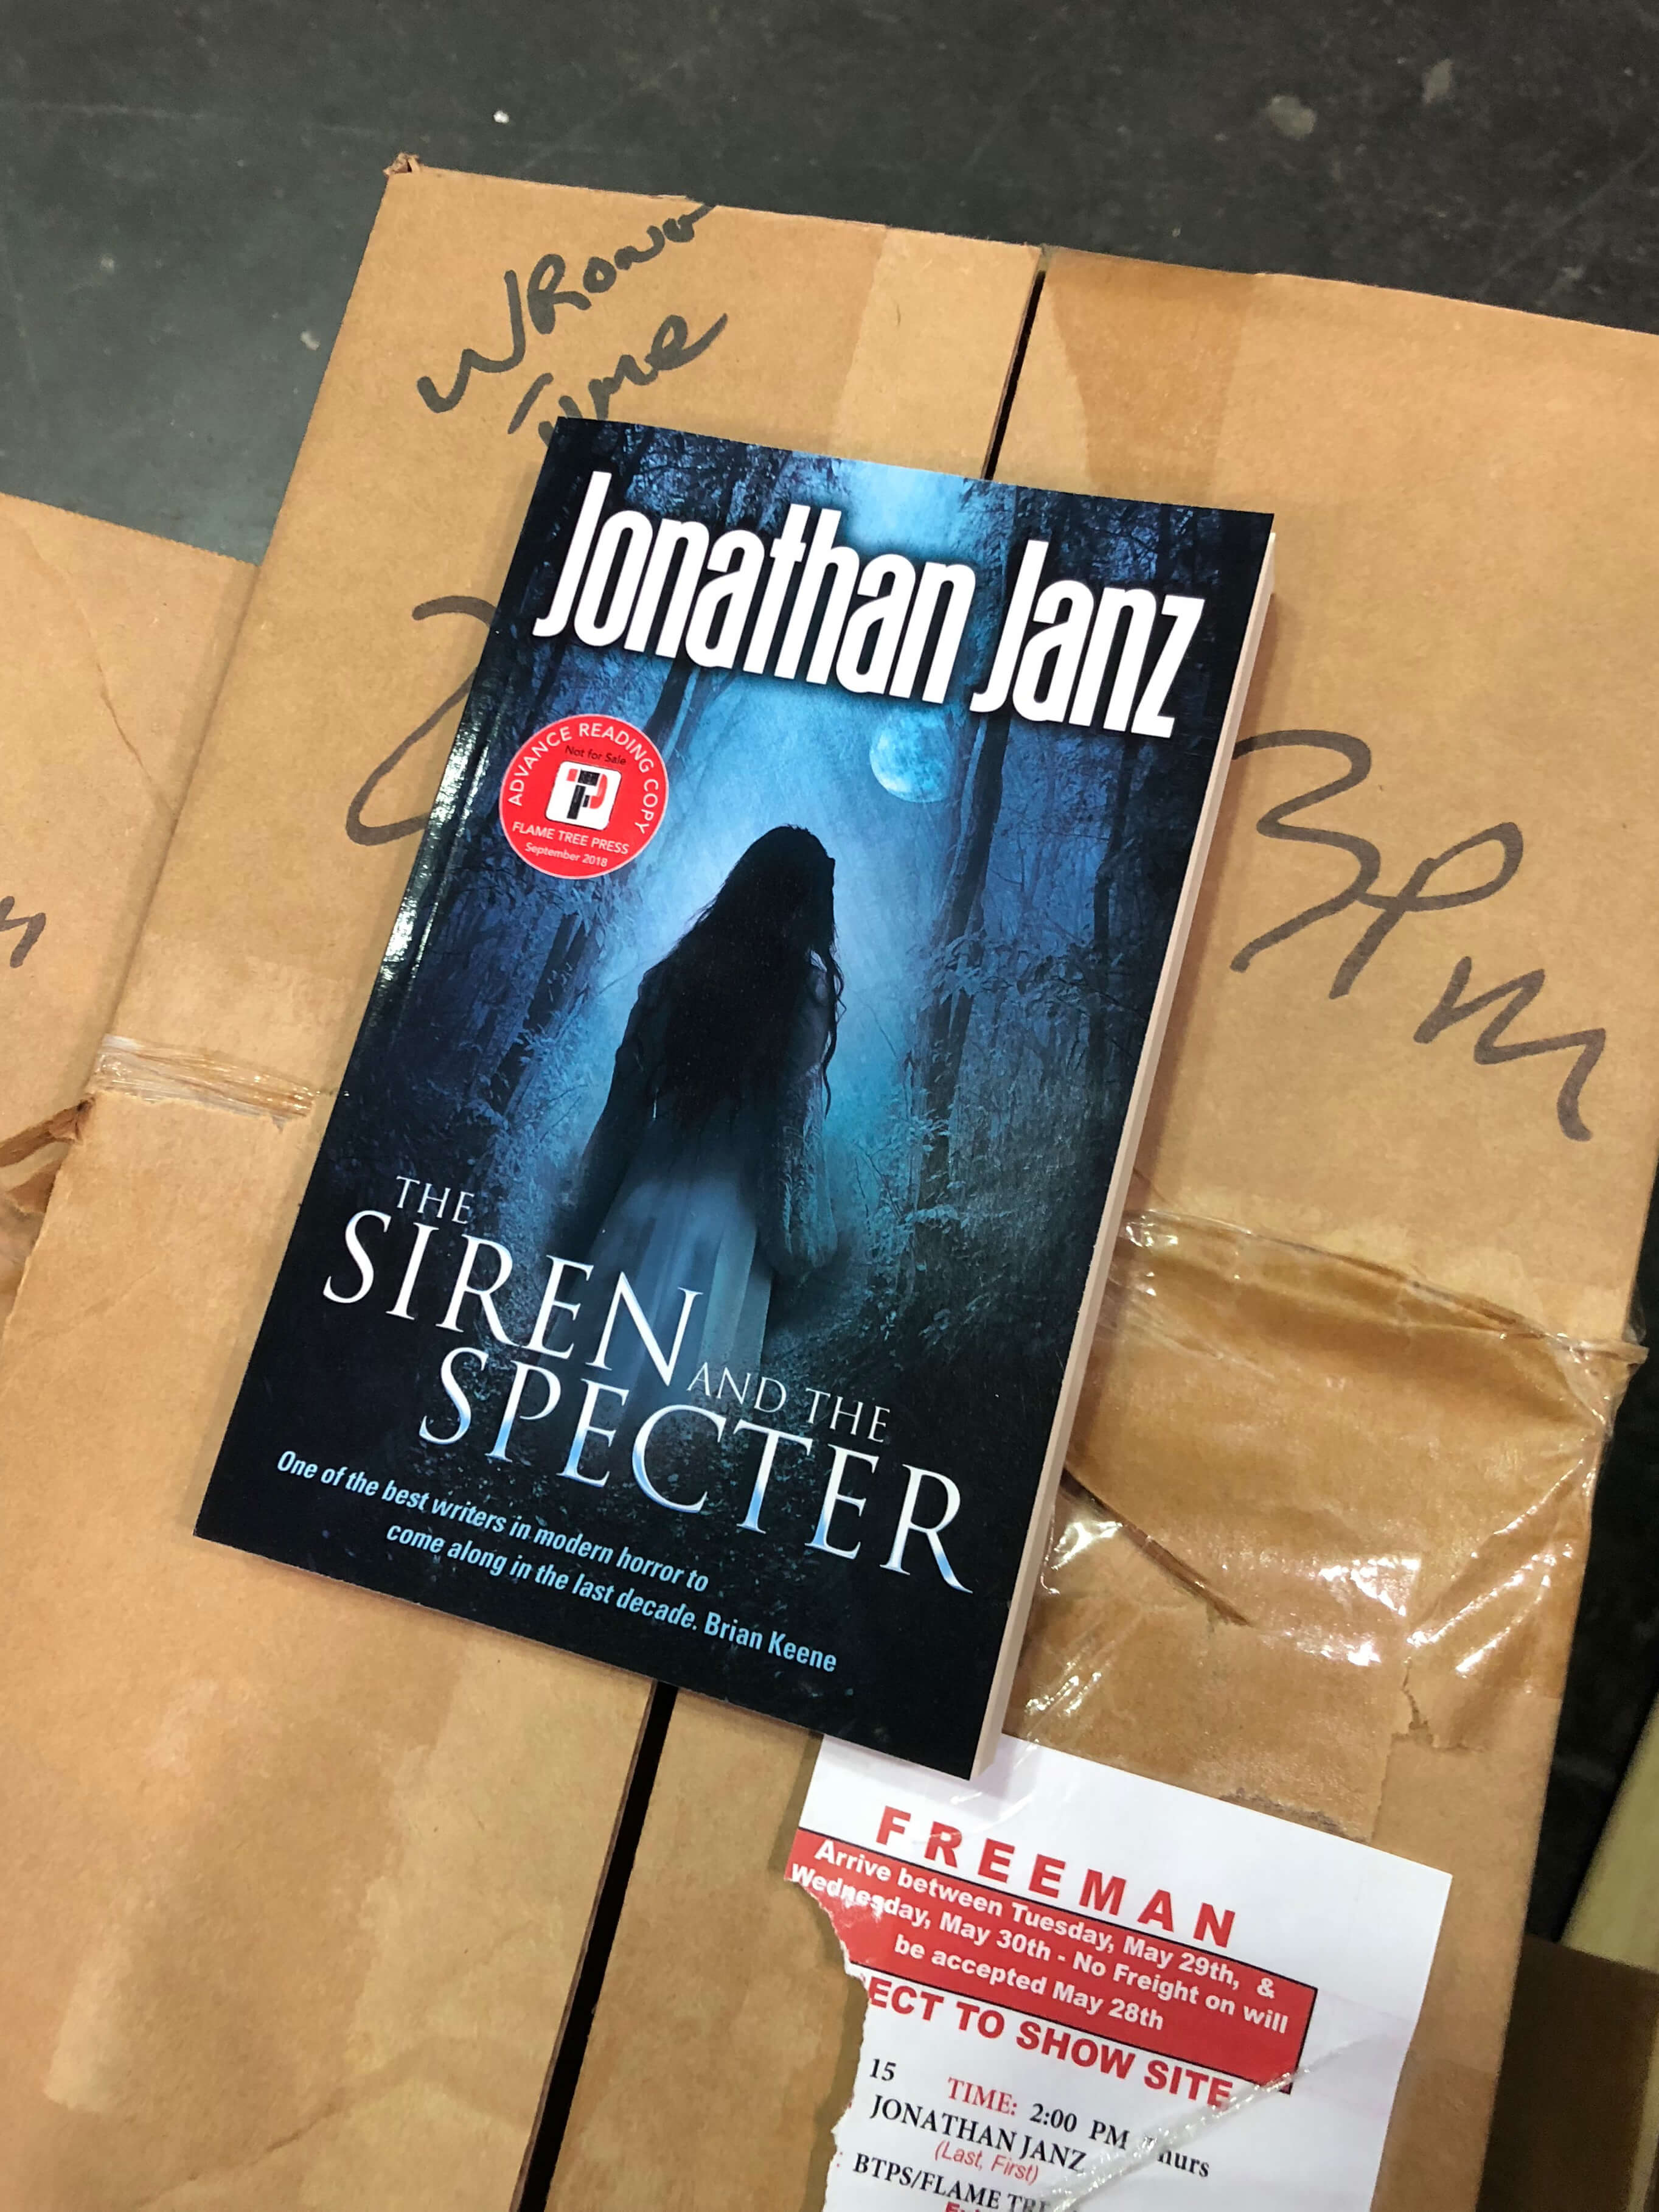 Jonathan Janz, The Siren and the Specter, Flame Tree Press